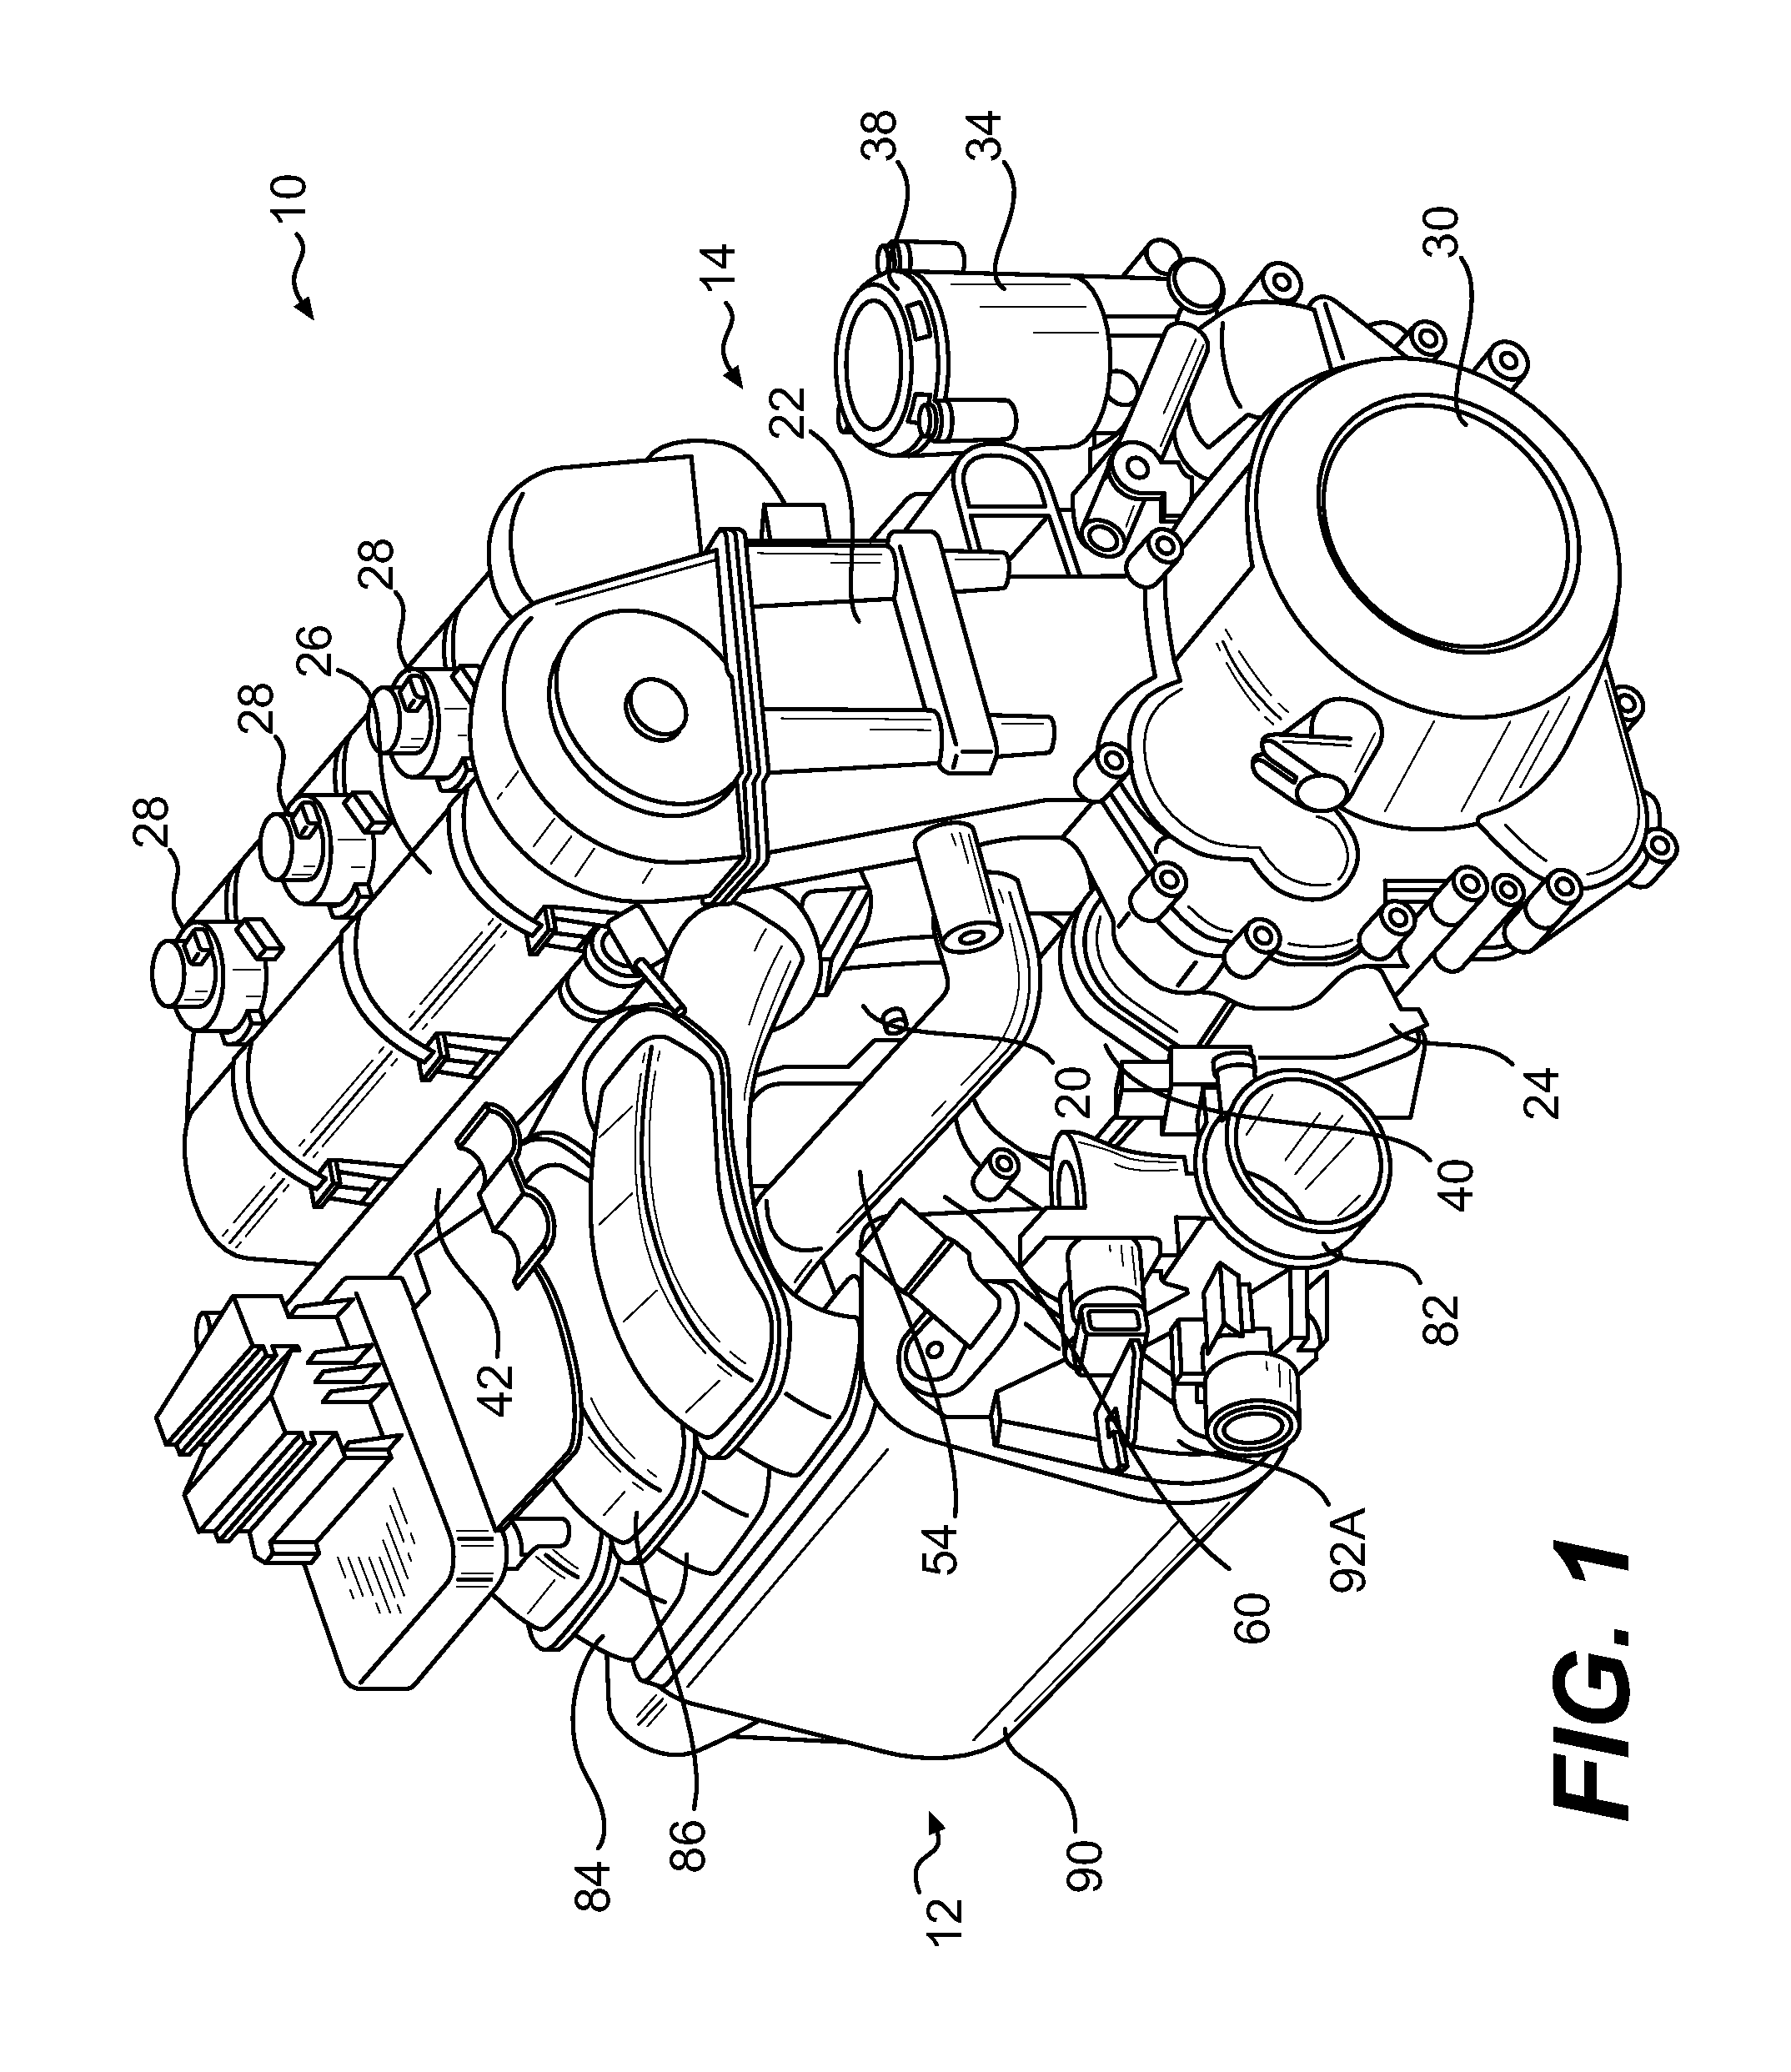 Lubrication system for a dry sump internal combustion engine